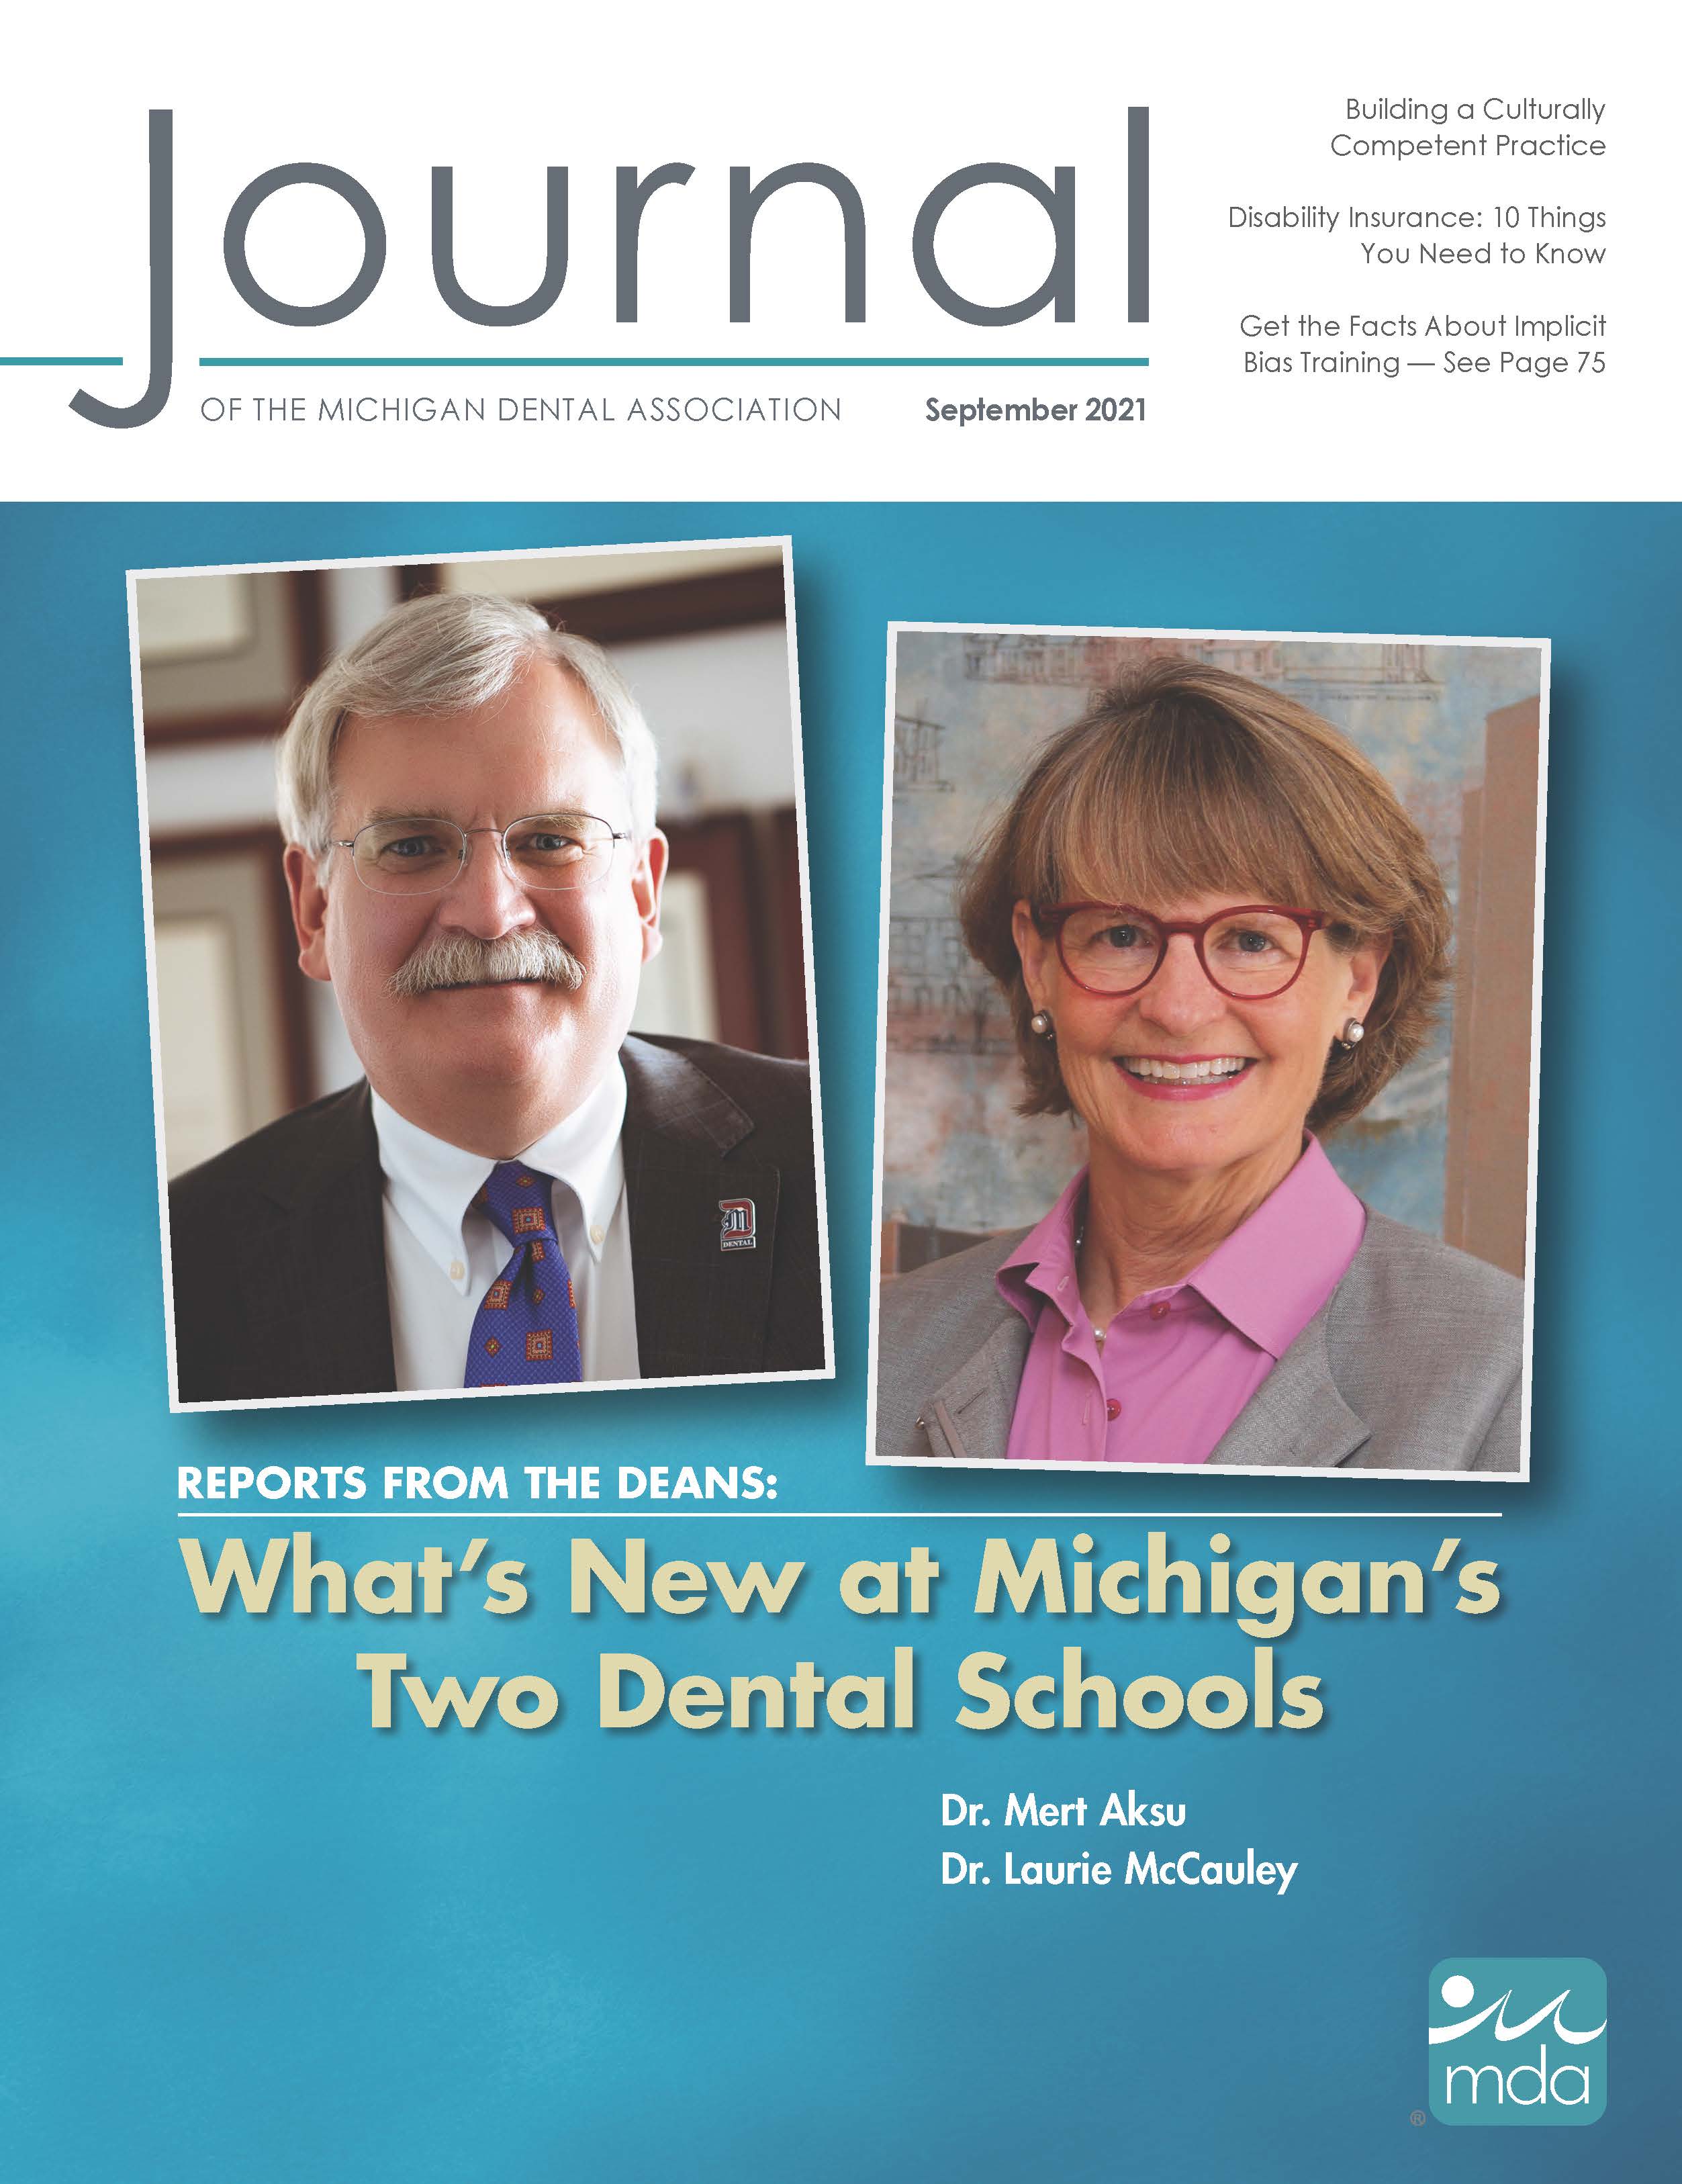 Cover of the Journal of the Michigan Dental Association with the headshots of Dr. Mert Aksu and Dr. Laurie McCauley